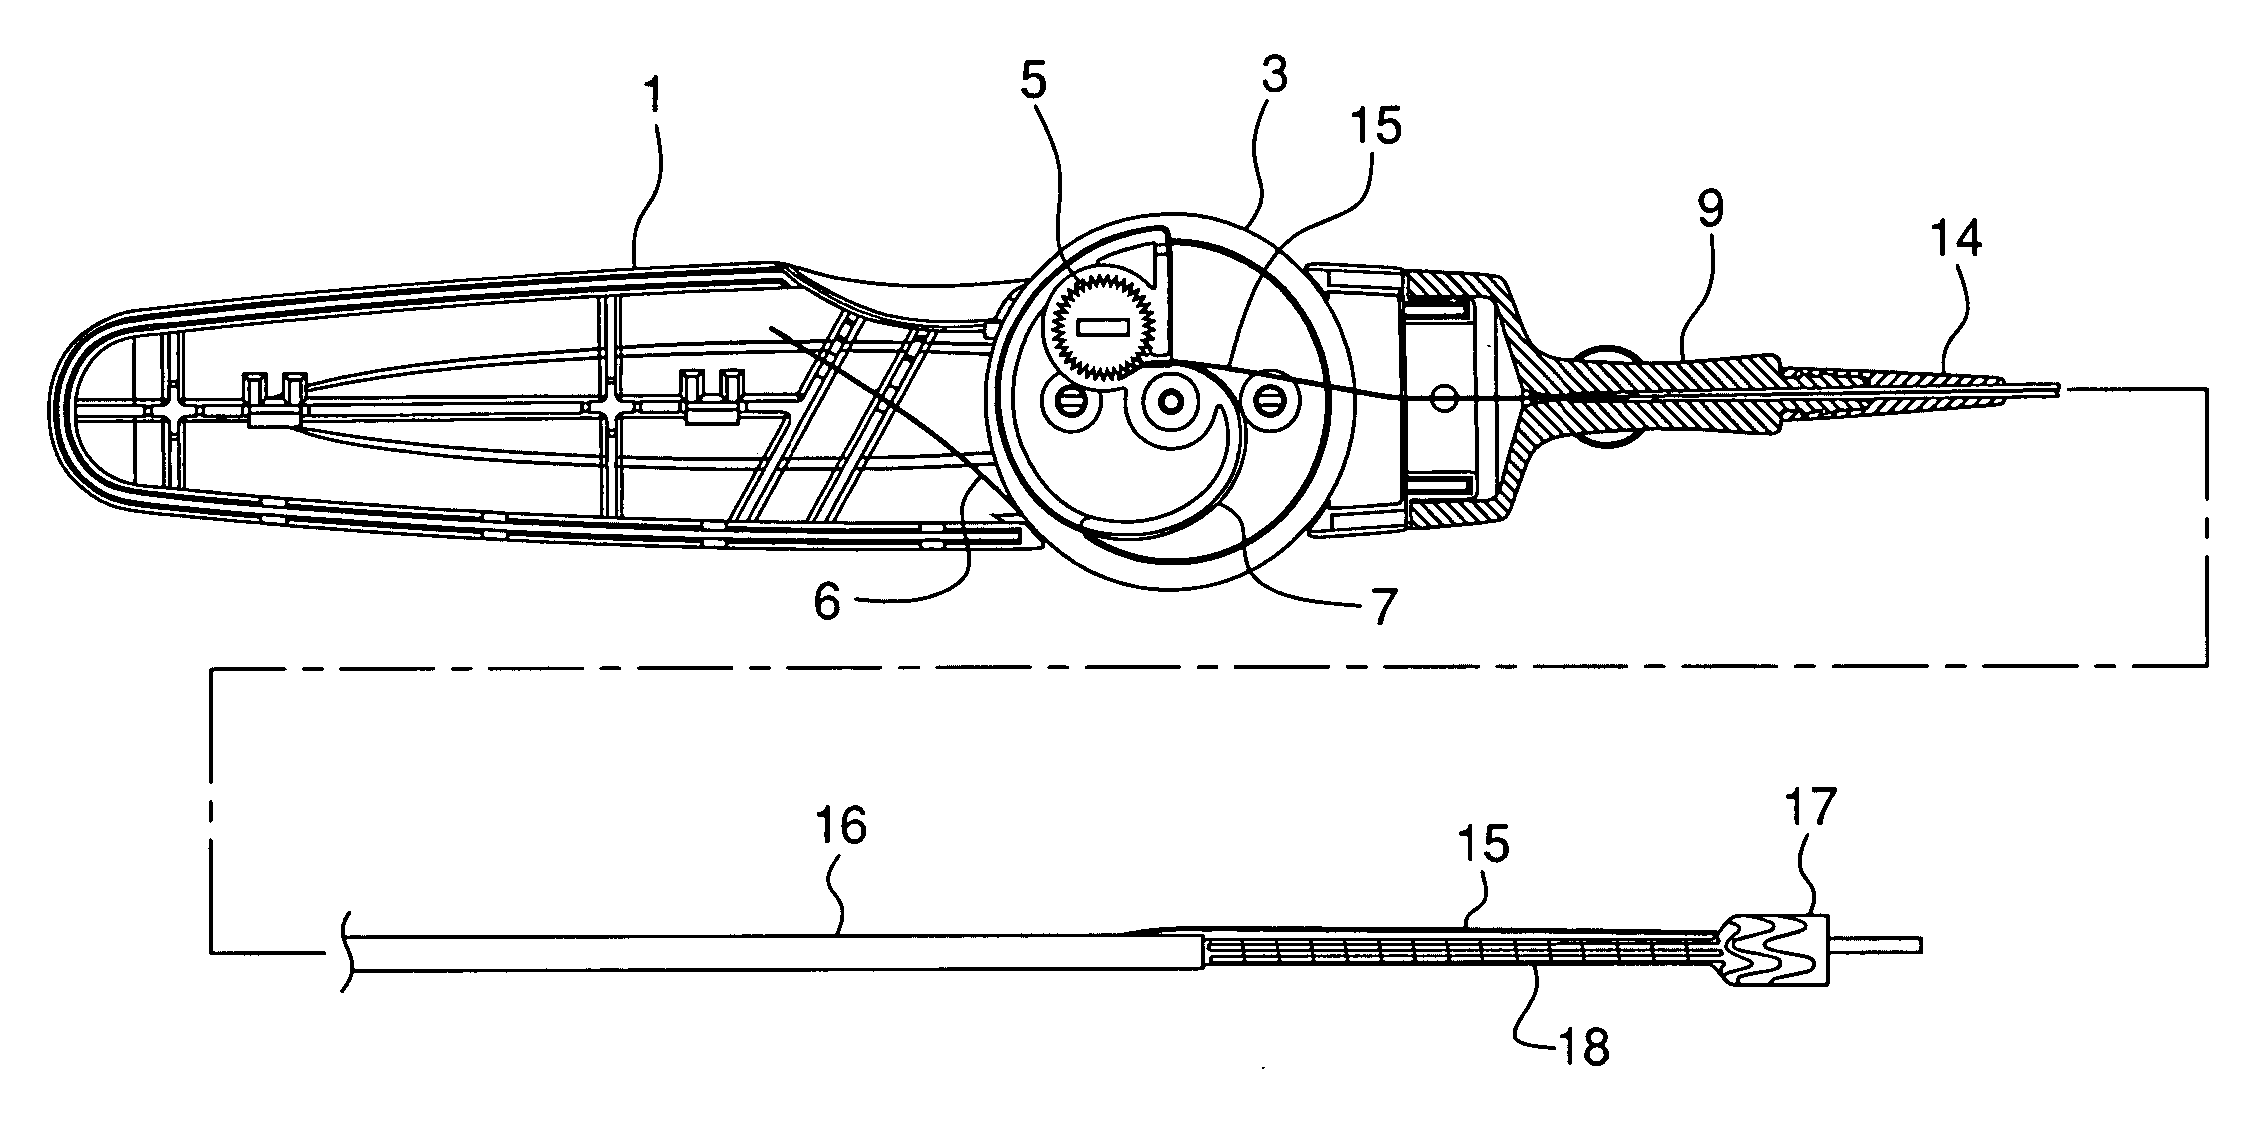 Device for deploying an implantable medical device